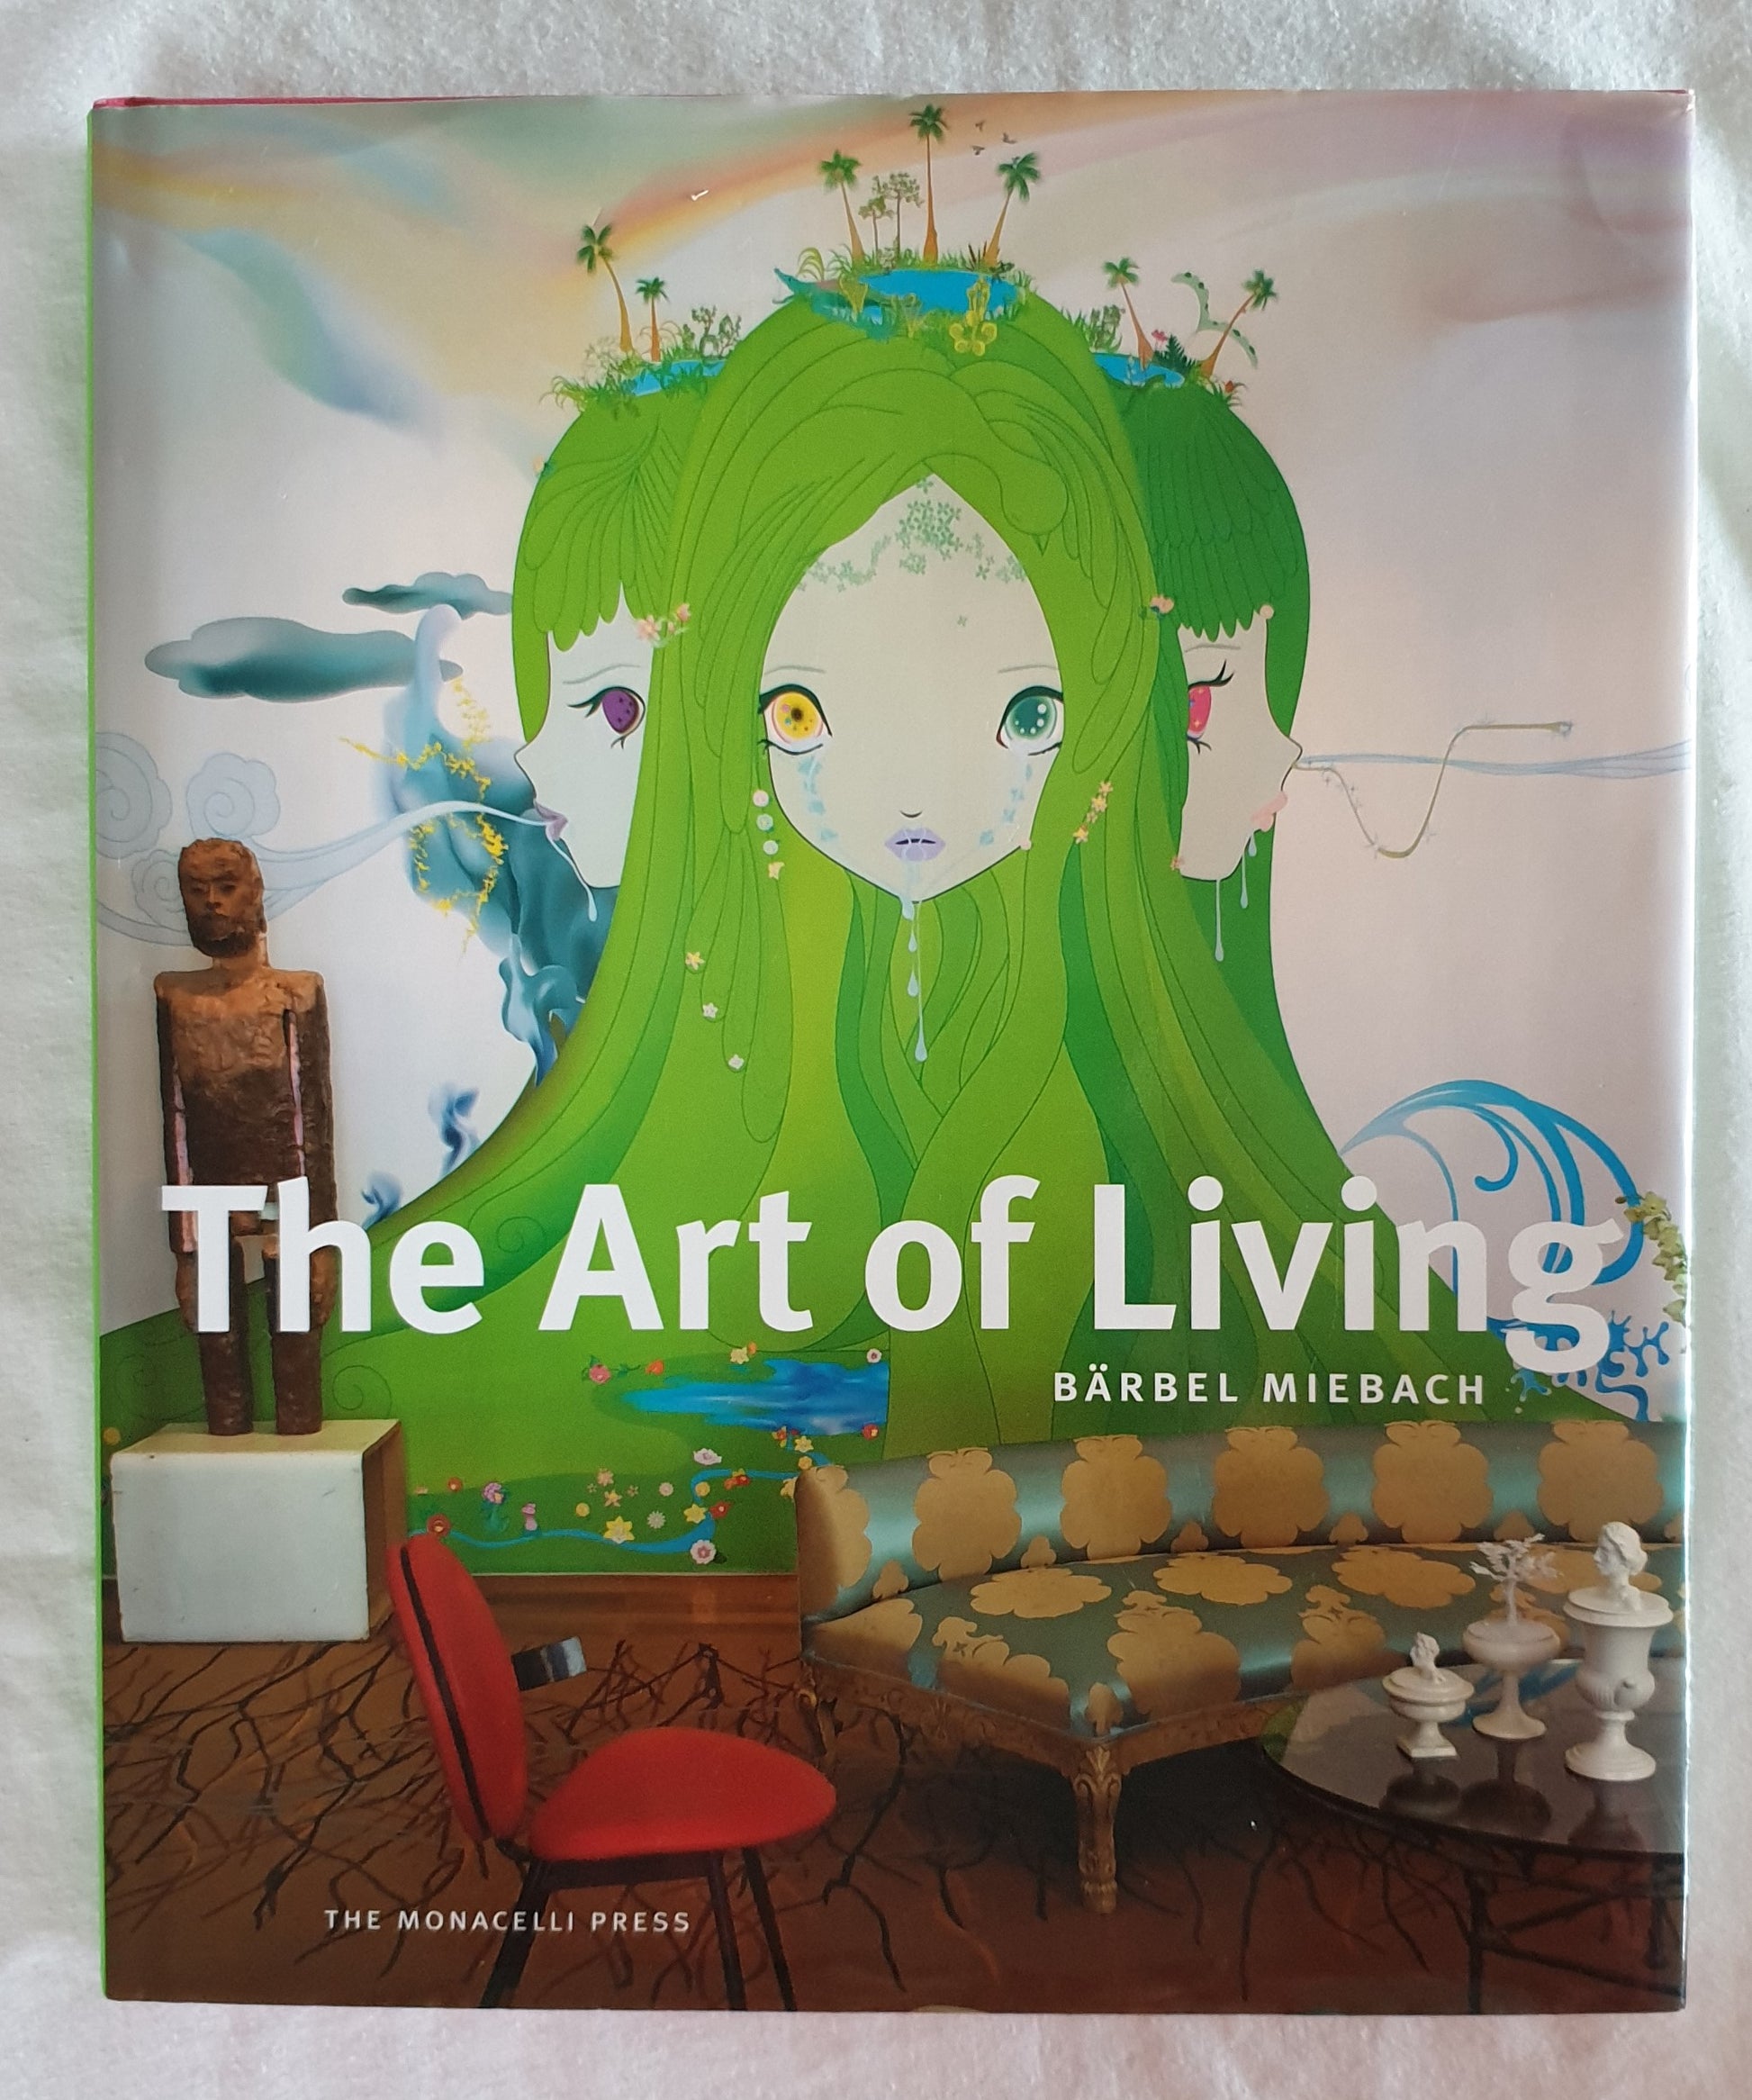 The Art of Living  Photographs by Barbel Miebach  Text by Claudia Steinberg